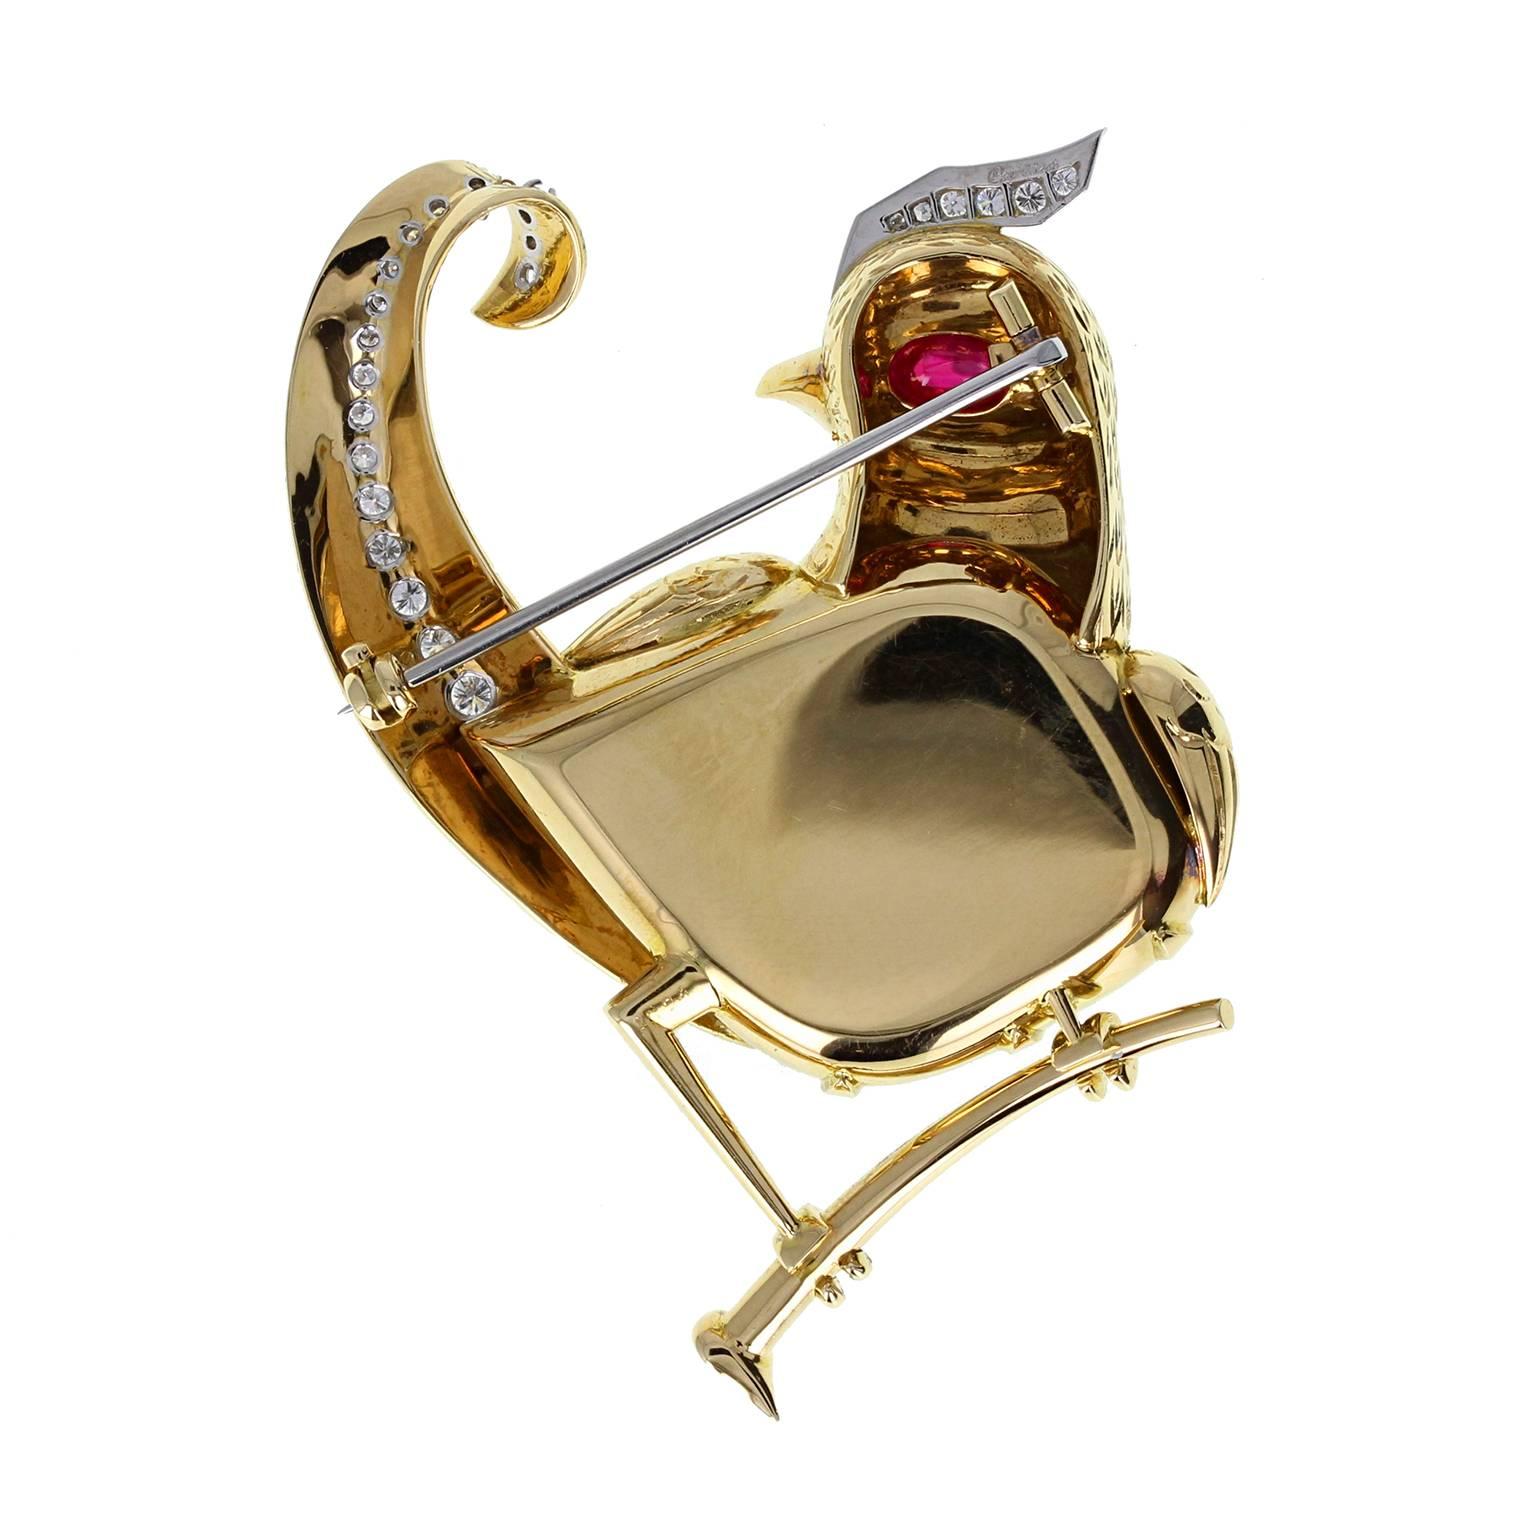 A beautiful brooch modelled as a bird perched on a branch. Opal body and textured gold plummage adorned with brilliant-cut diamonds. Single cabochon ruby eye. Signed Cartier and numbered. With original fitted box. Circa 1965

 
Setting
Tests as